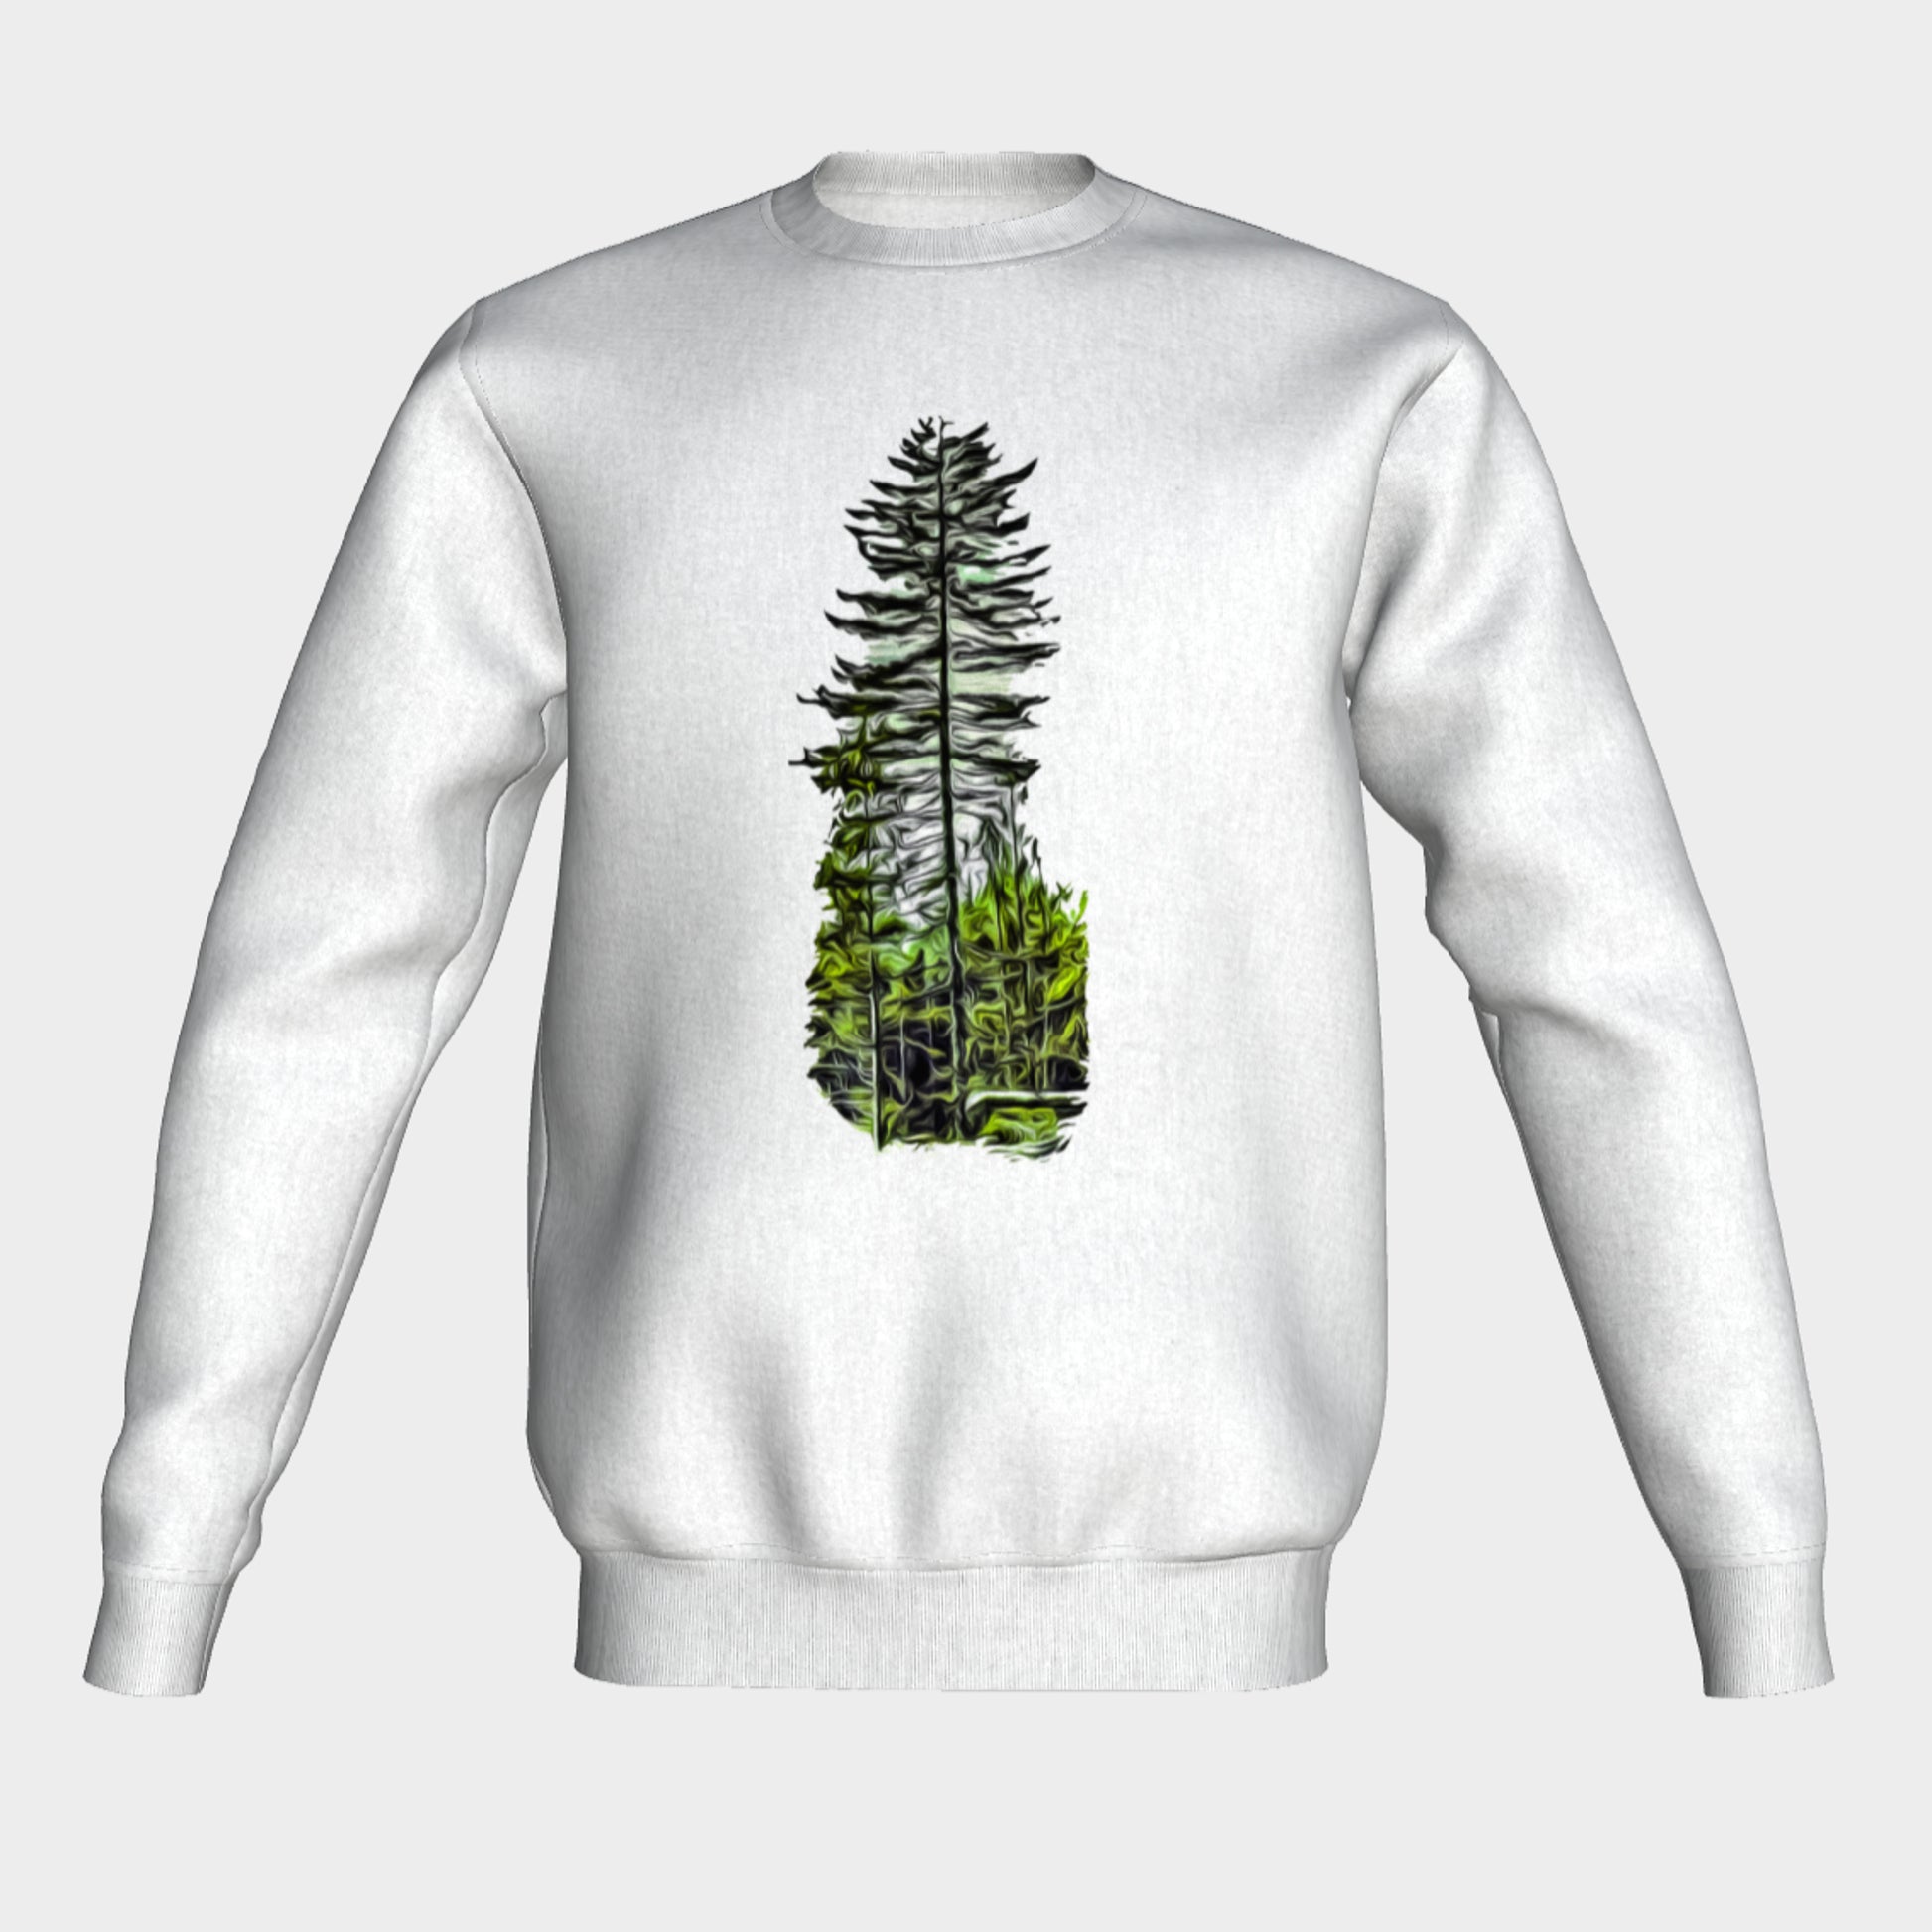 Old Growth Forest Crewneck Sweatshirt What’s better than a super cozy sweatshirt? A super cozy sweatshirt from Van Isle Goddess!  Super cozy unisex sweatshirt for those chilly days.  Excellent for men or women.   Fit is roomy and comfortable. 